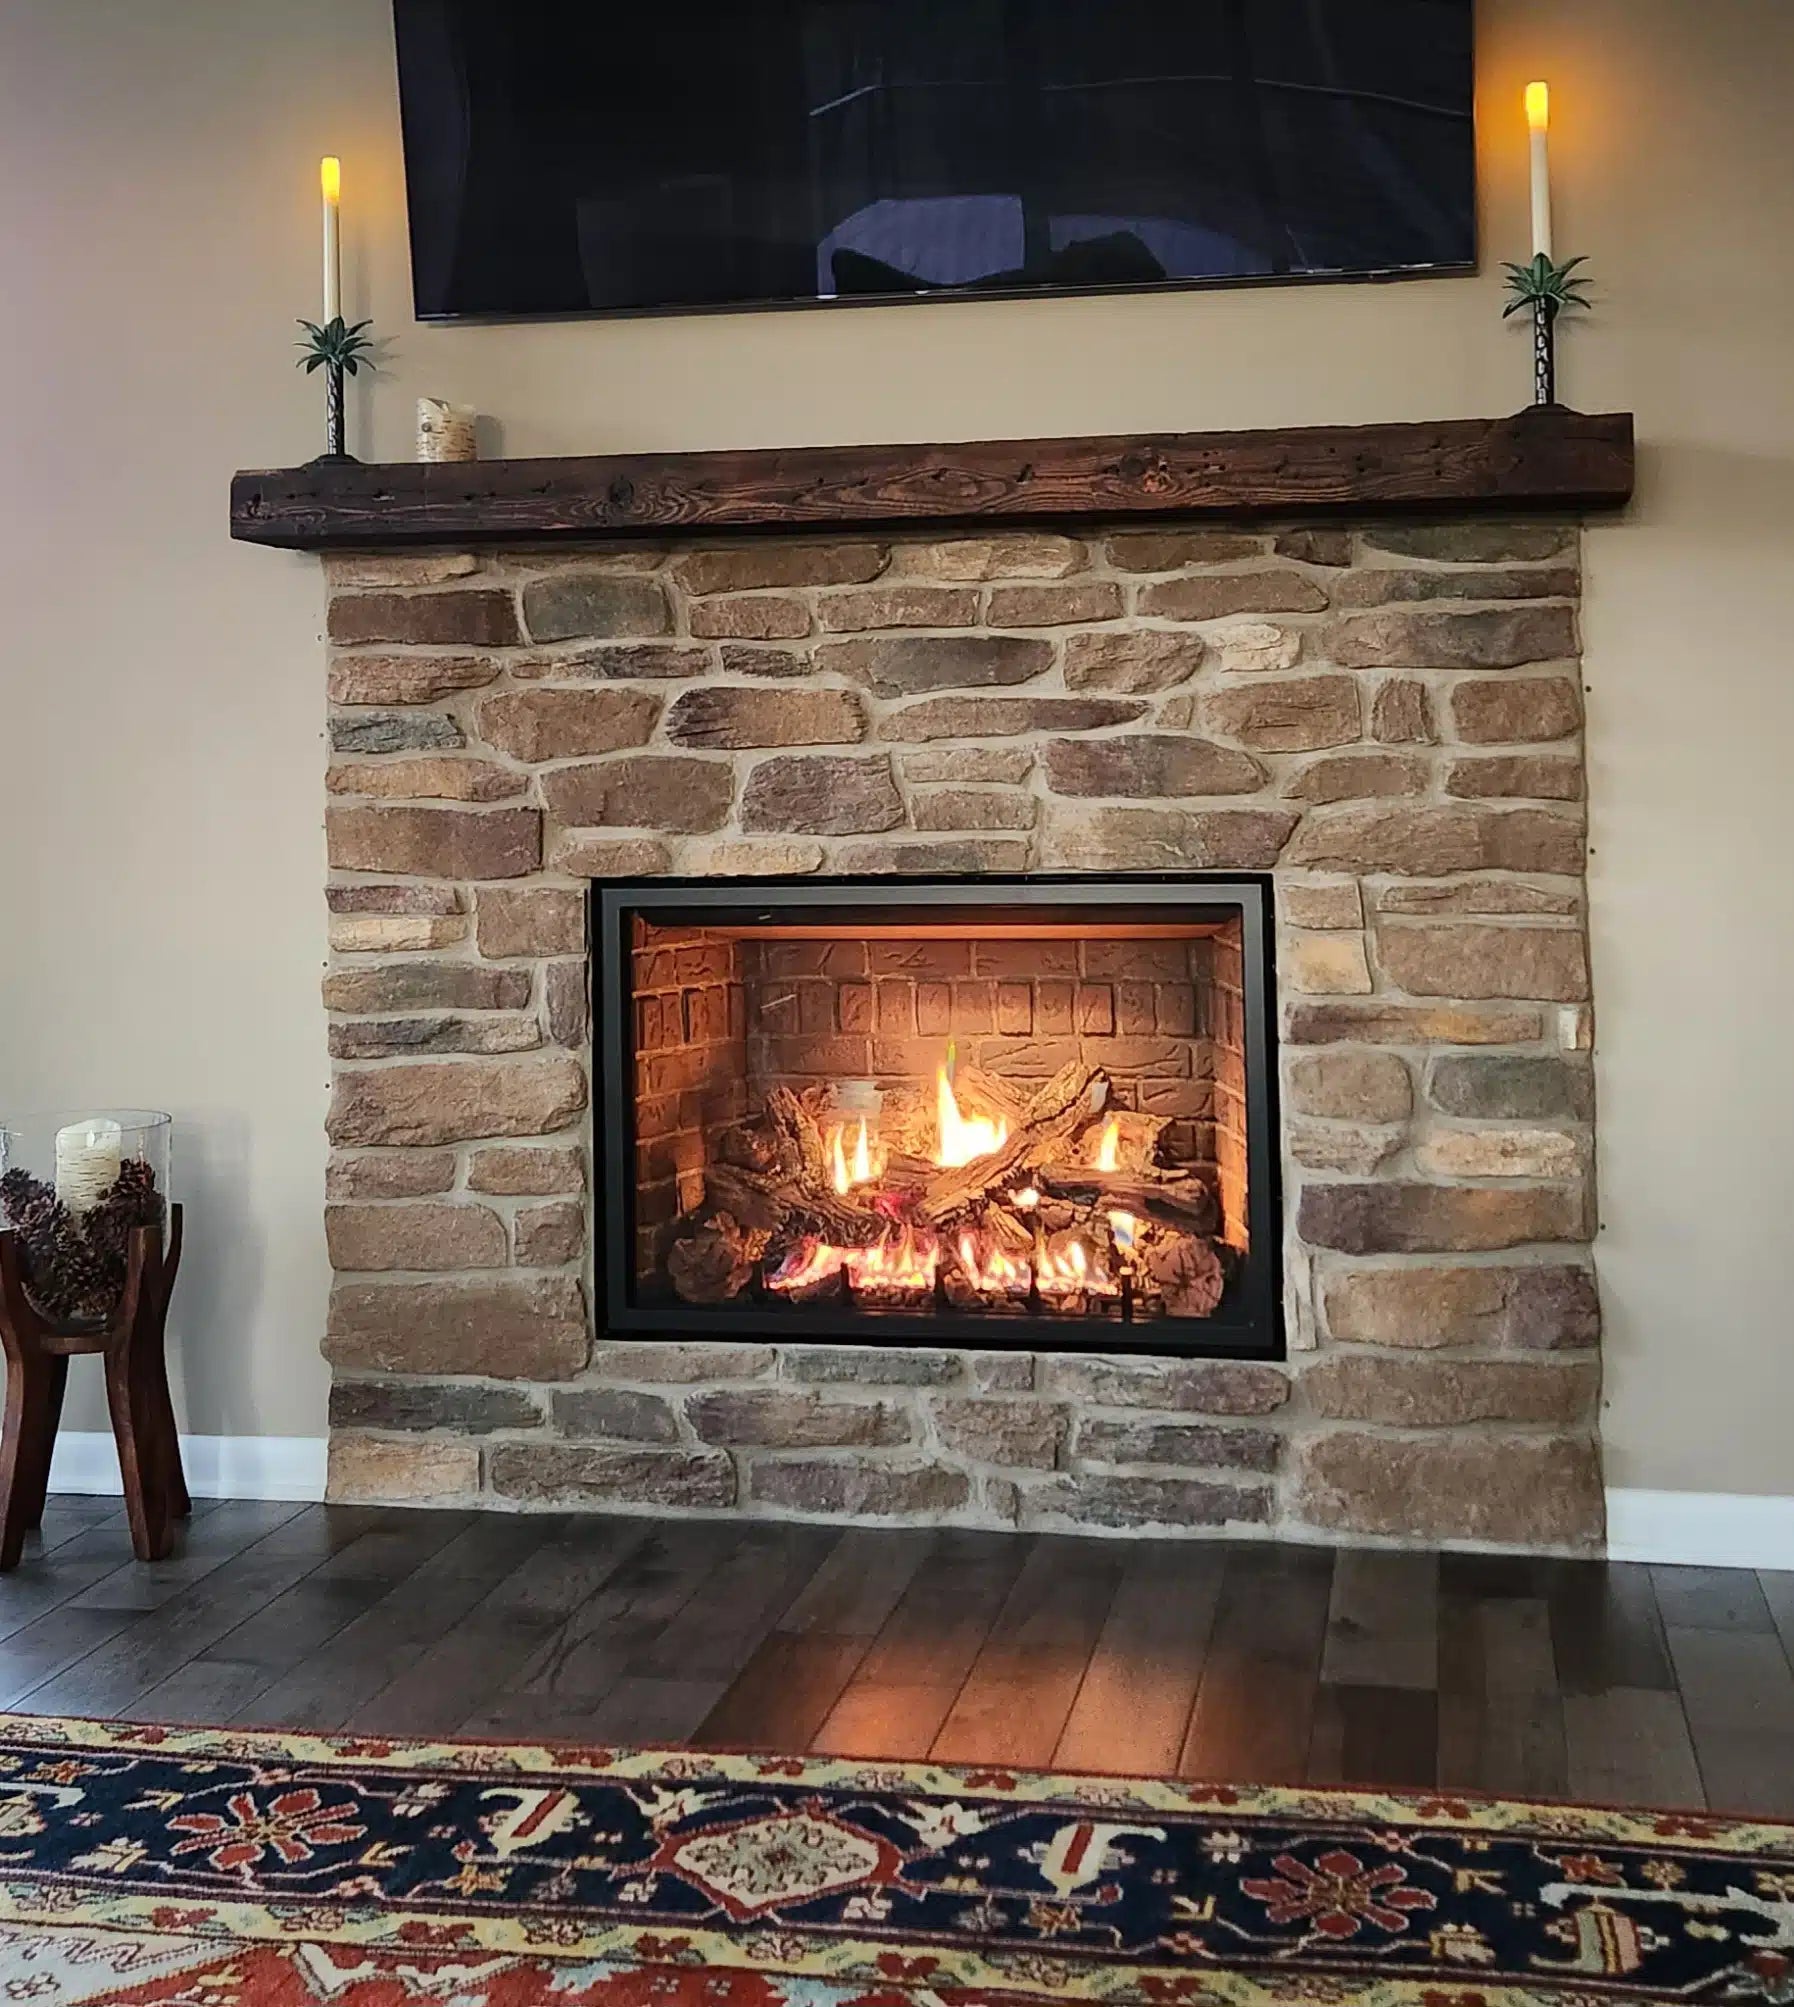 a reclaimed wood floating fireplace mantel in the oil finish. the mantel is mounted above a stone fireplace surround with a lit fire underneath.